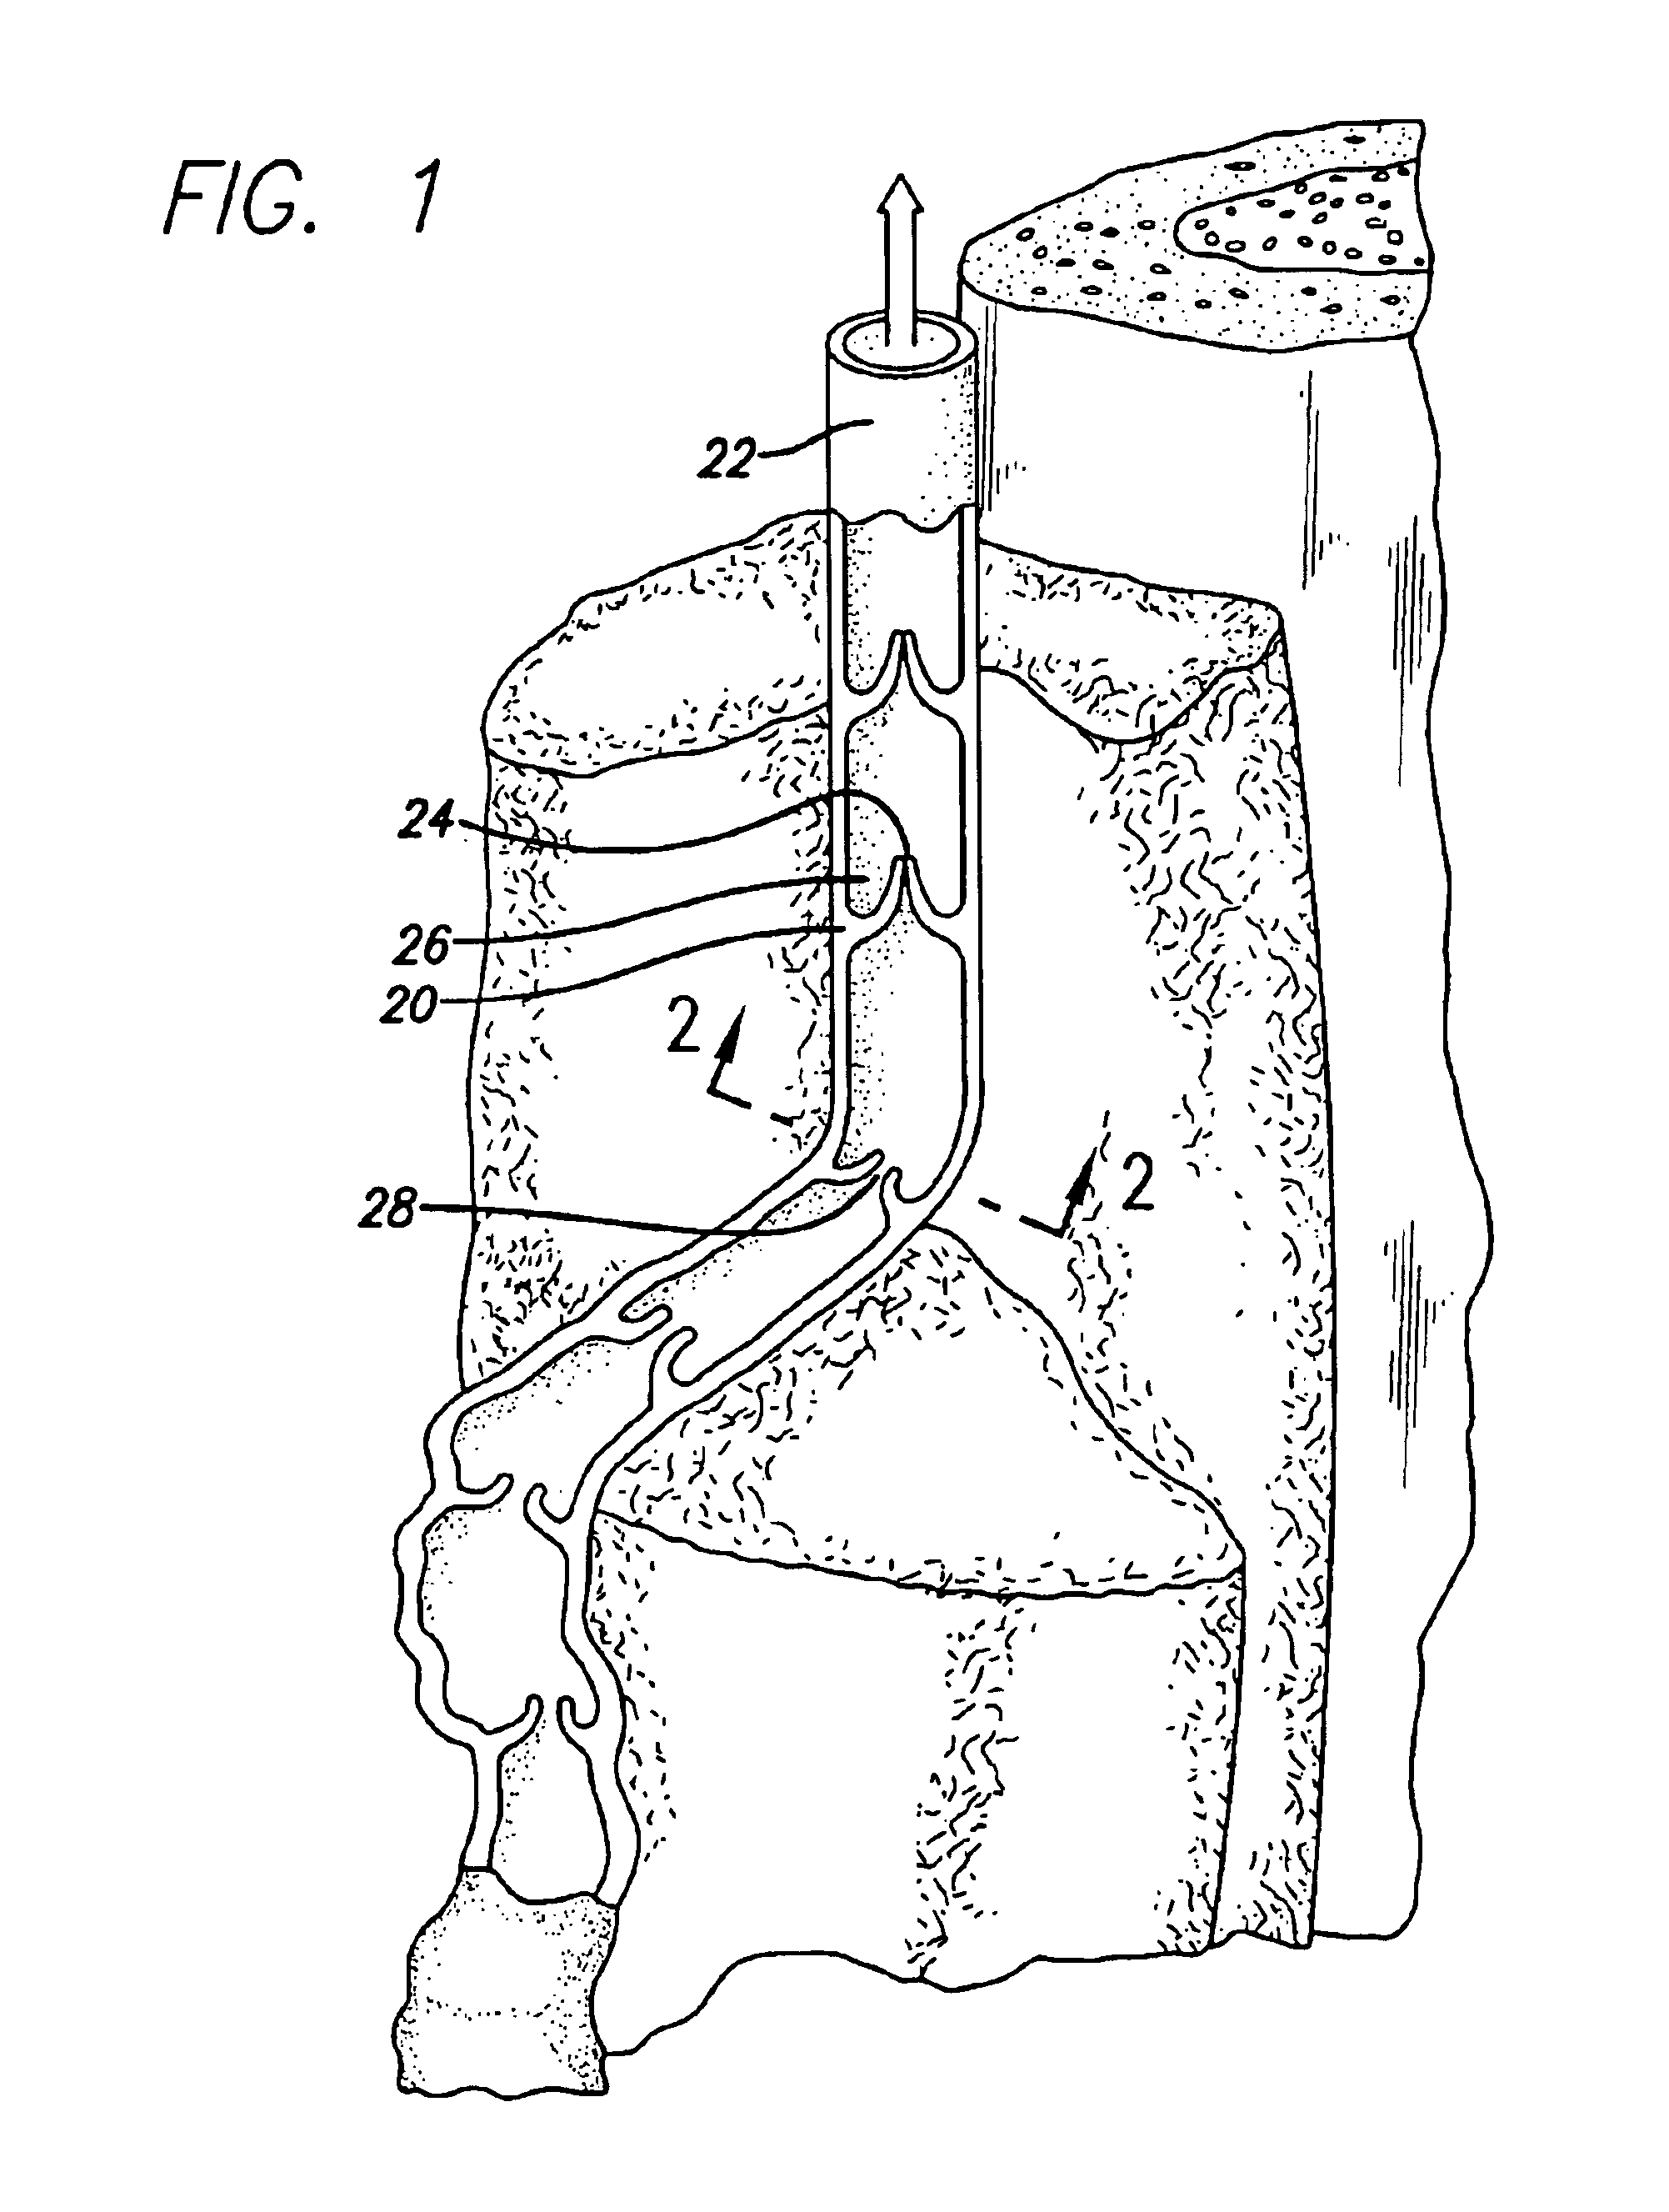 Apparatus for applying energy to biological tissue including the use of tumescent tissue compression